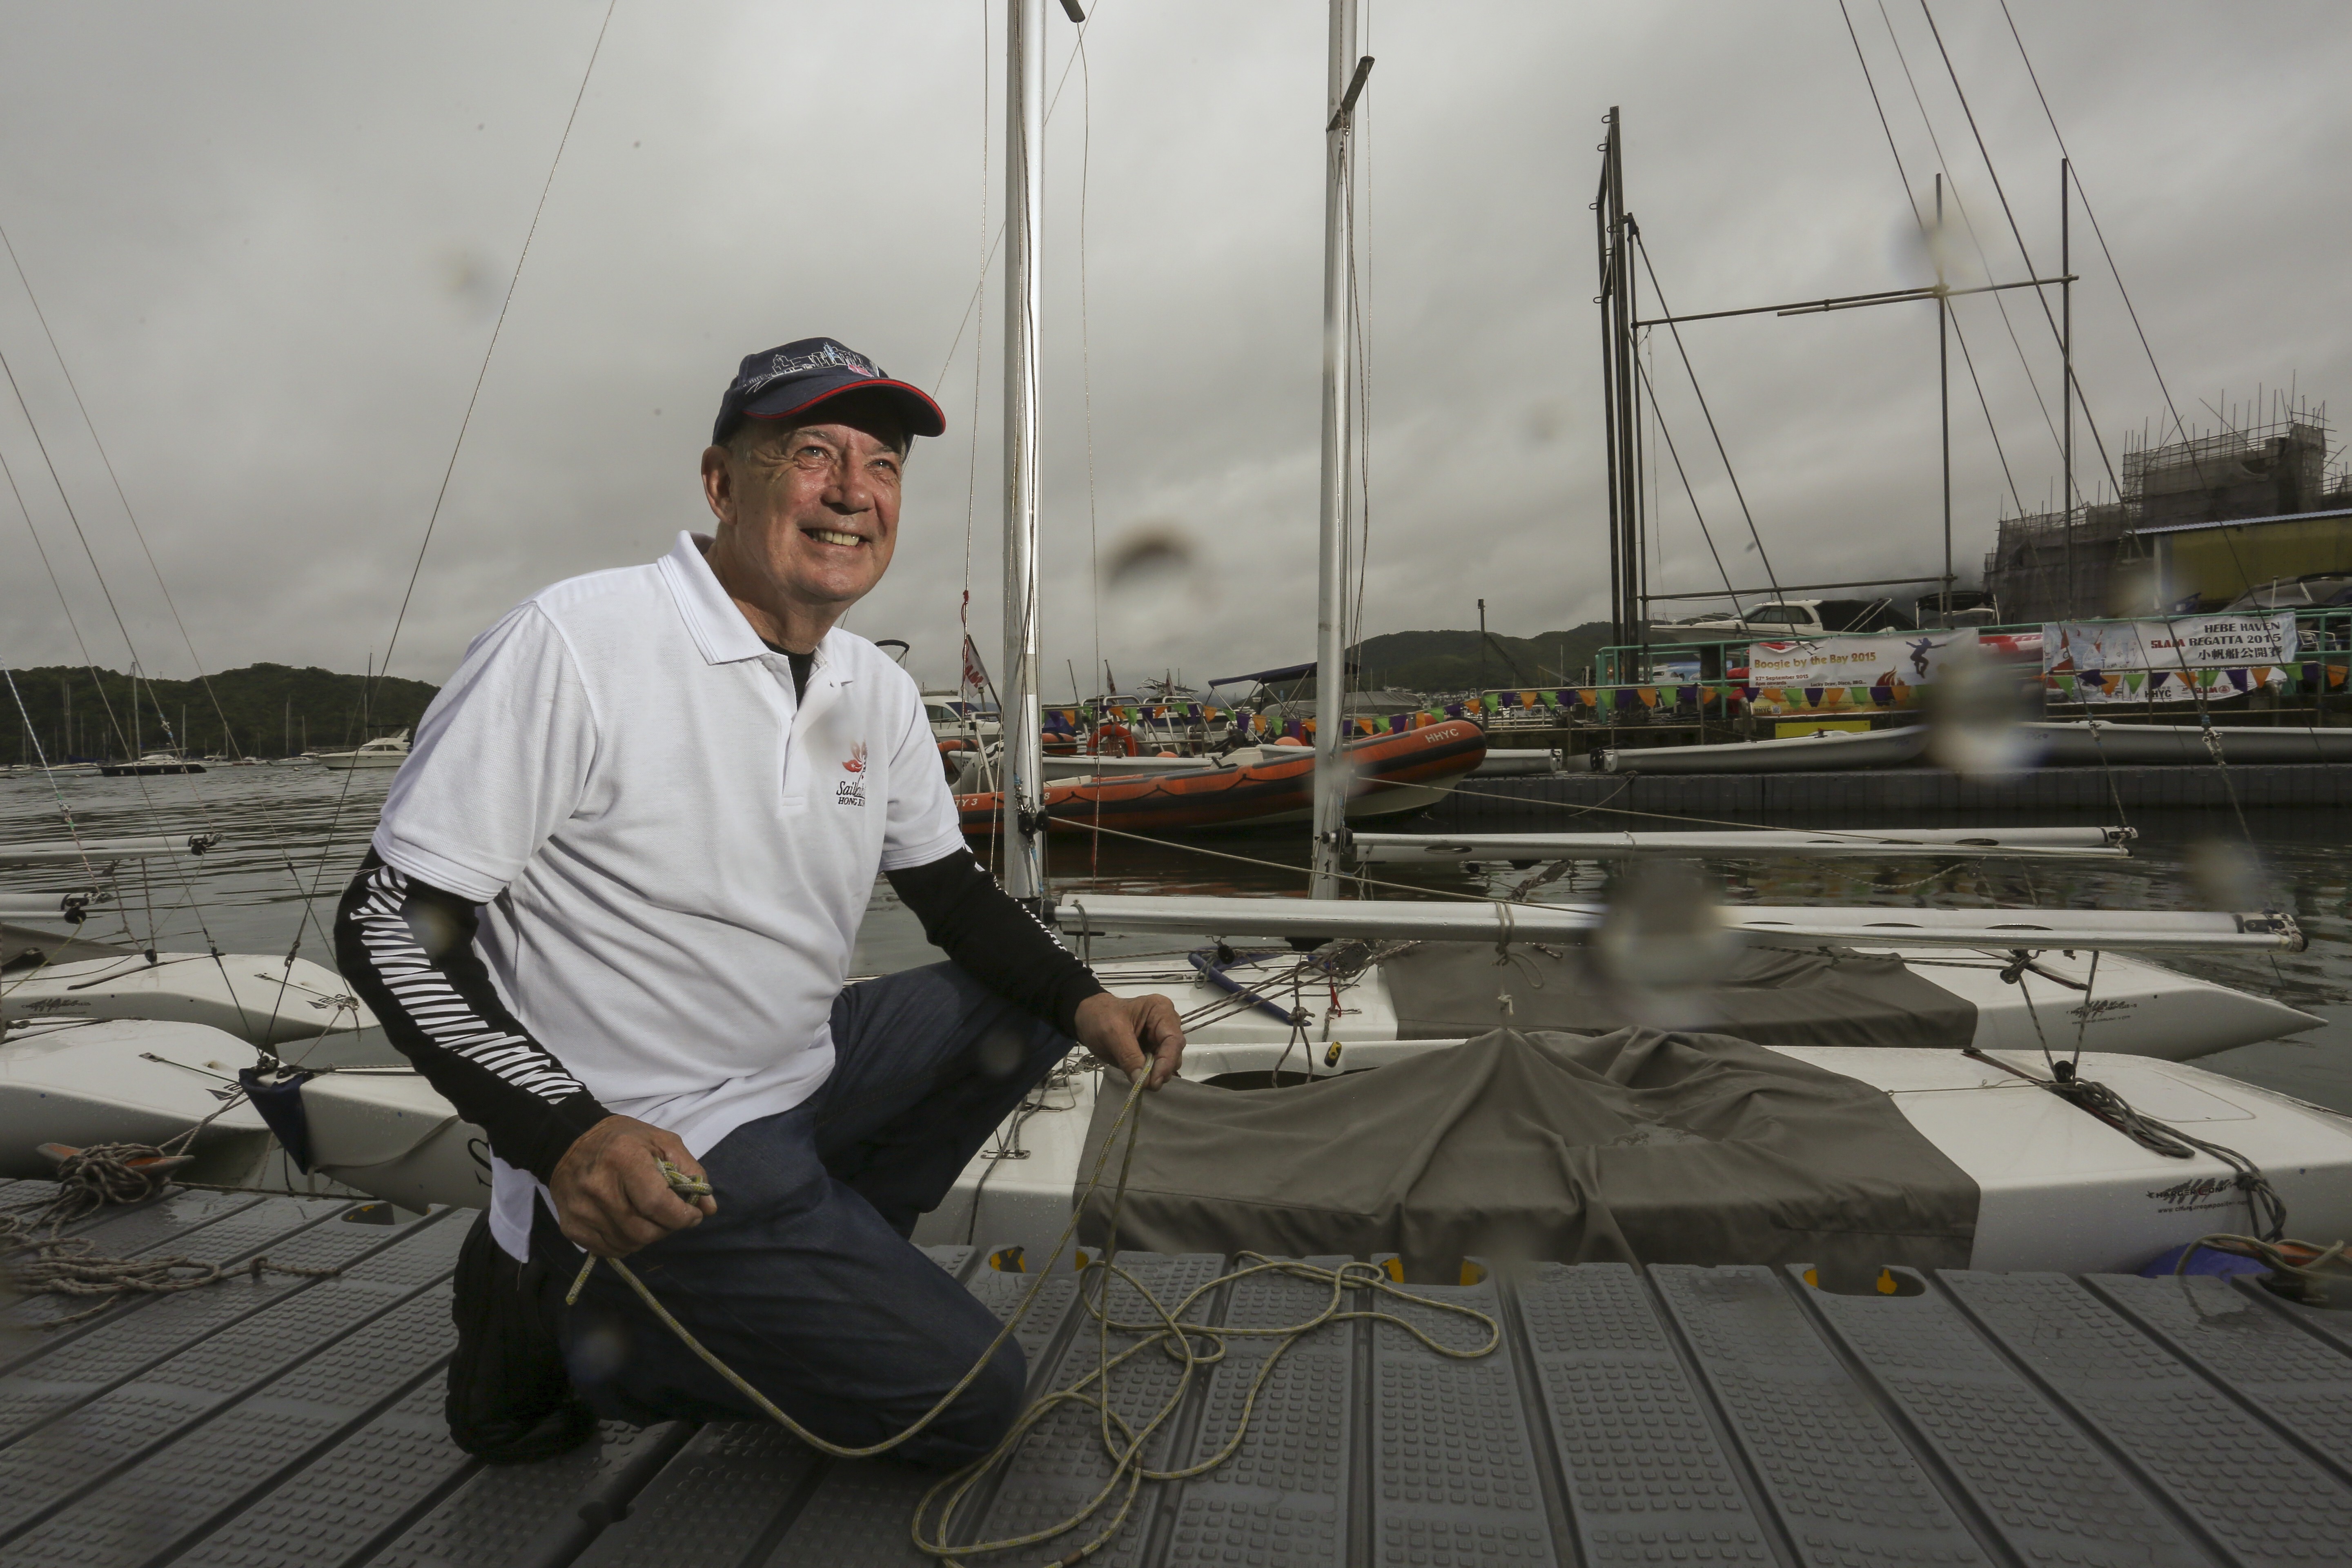 Mike Rawbone started Sailability with his wife Kay in 2009. He died on August 3, 2020 aged 75. Photo: Jonathan Wong